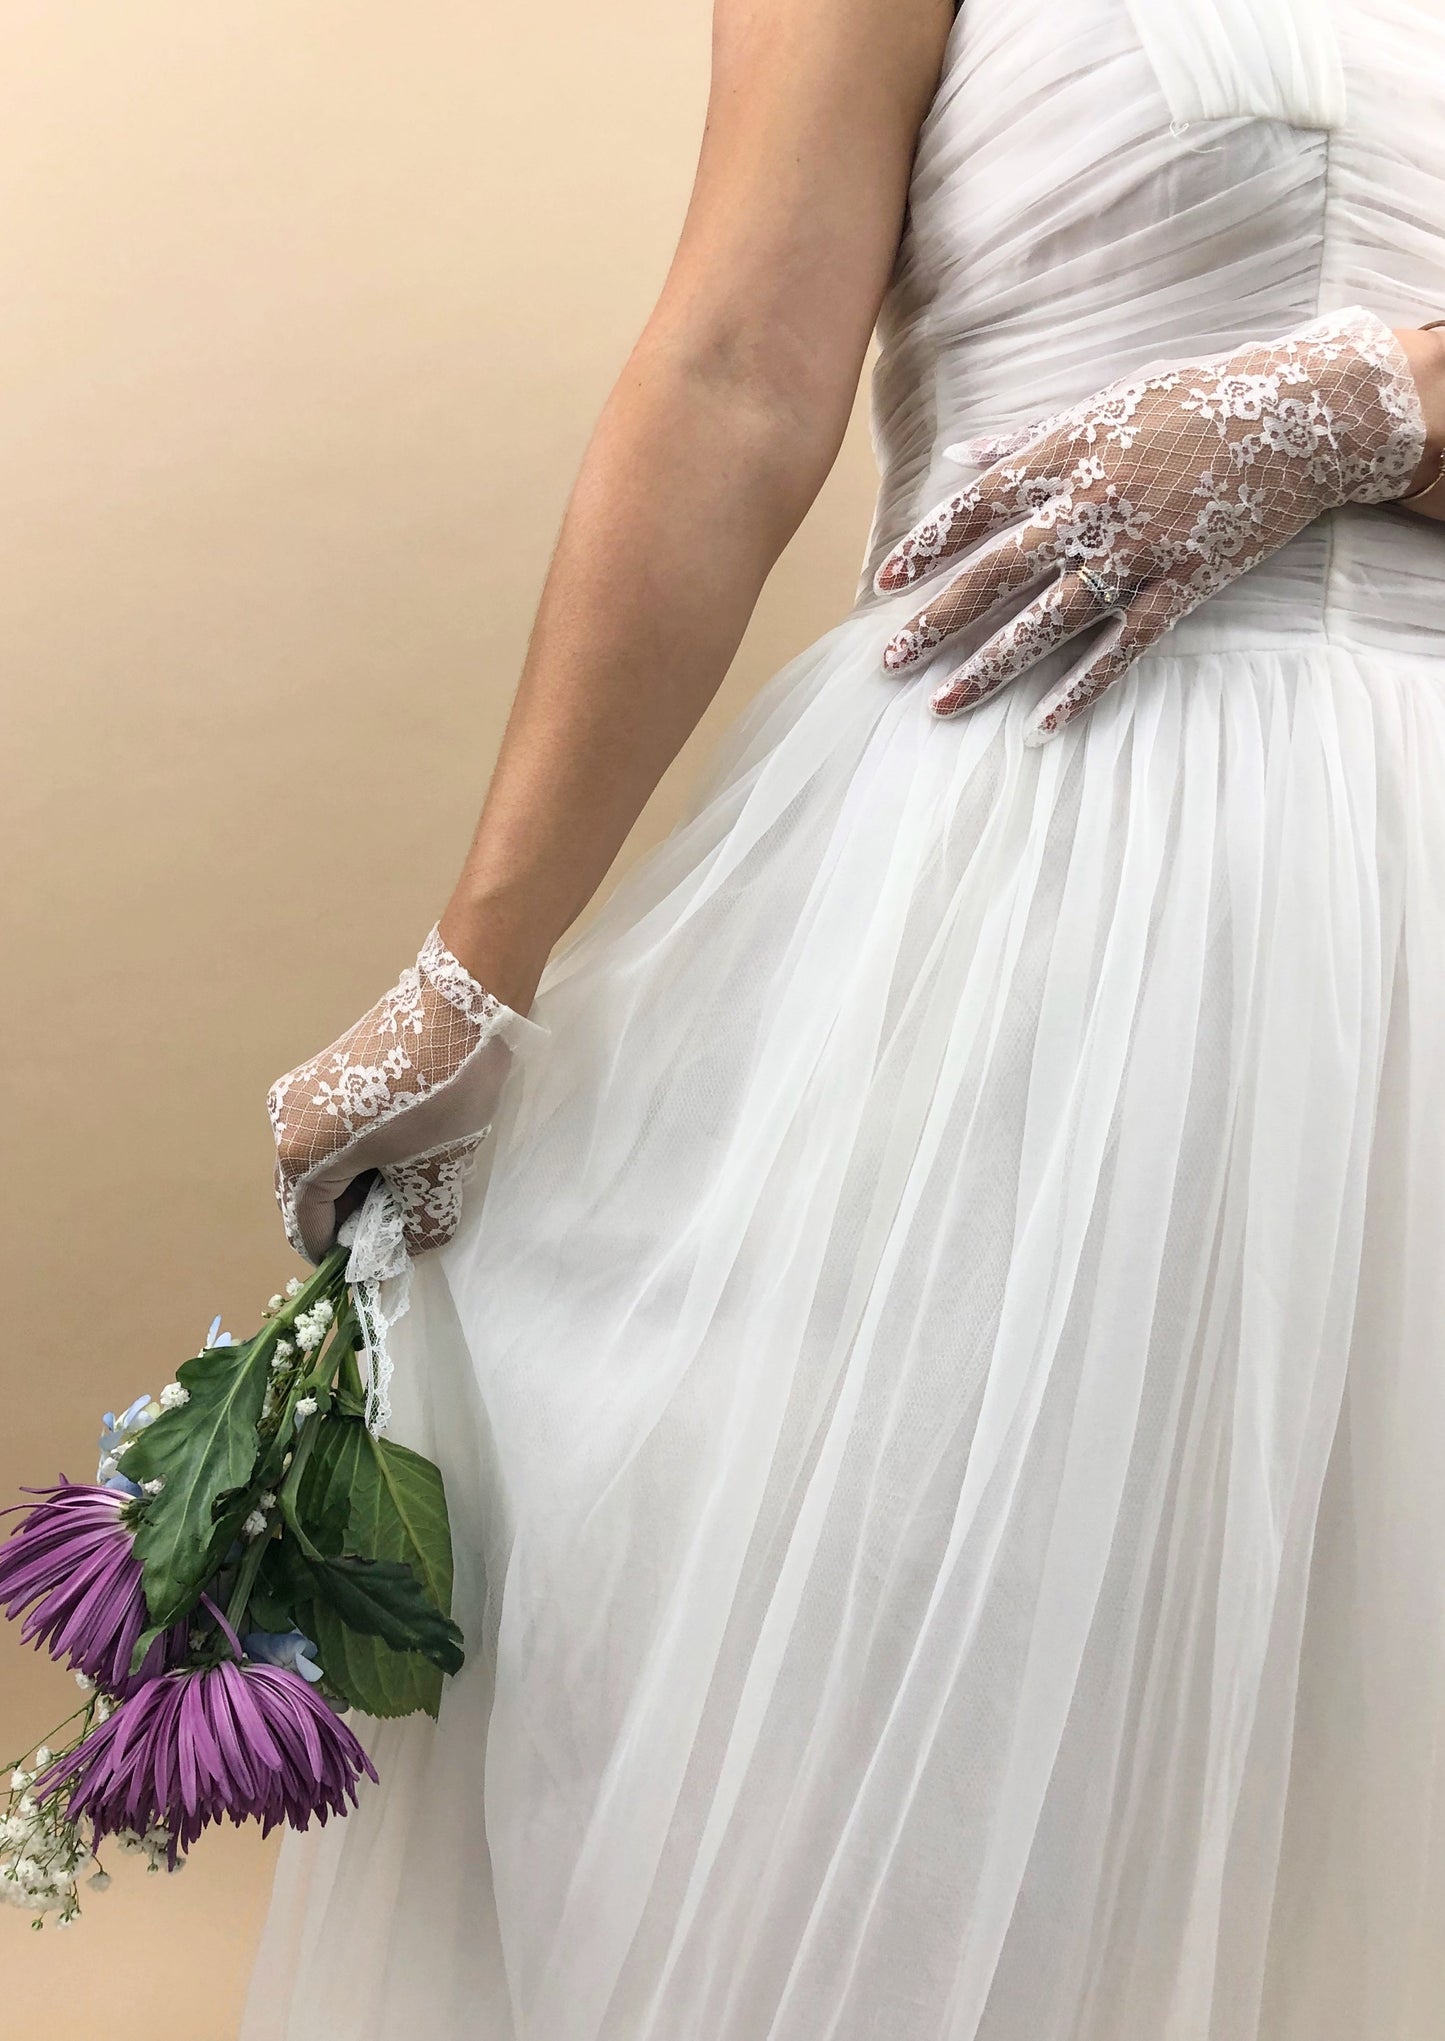 hands moving dress, hands have gloves on them and are also holding a bouquet